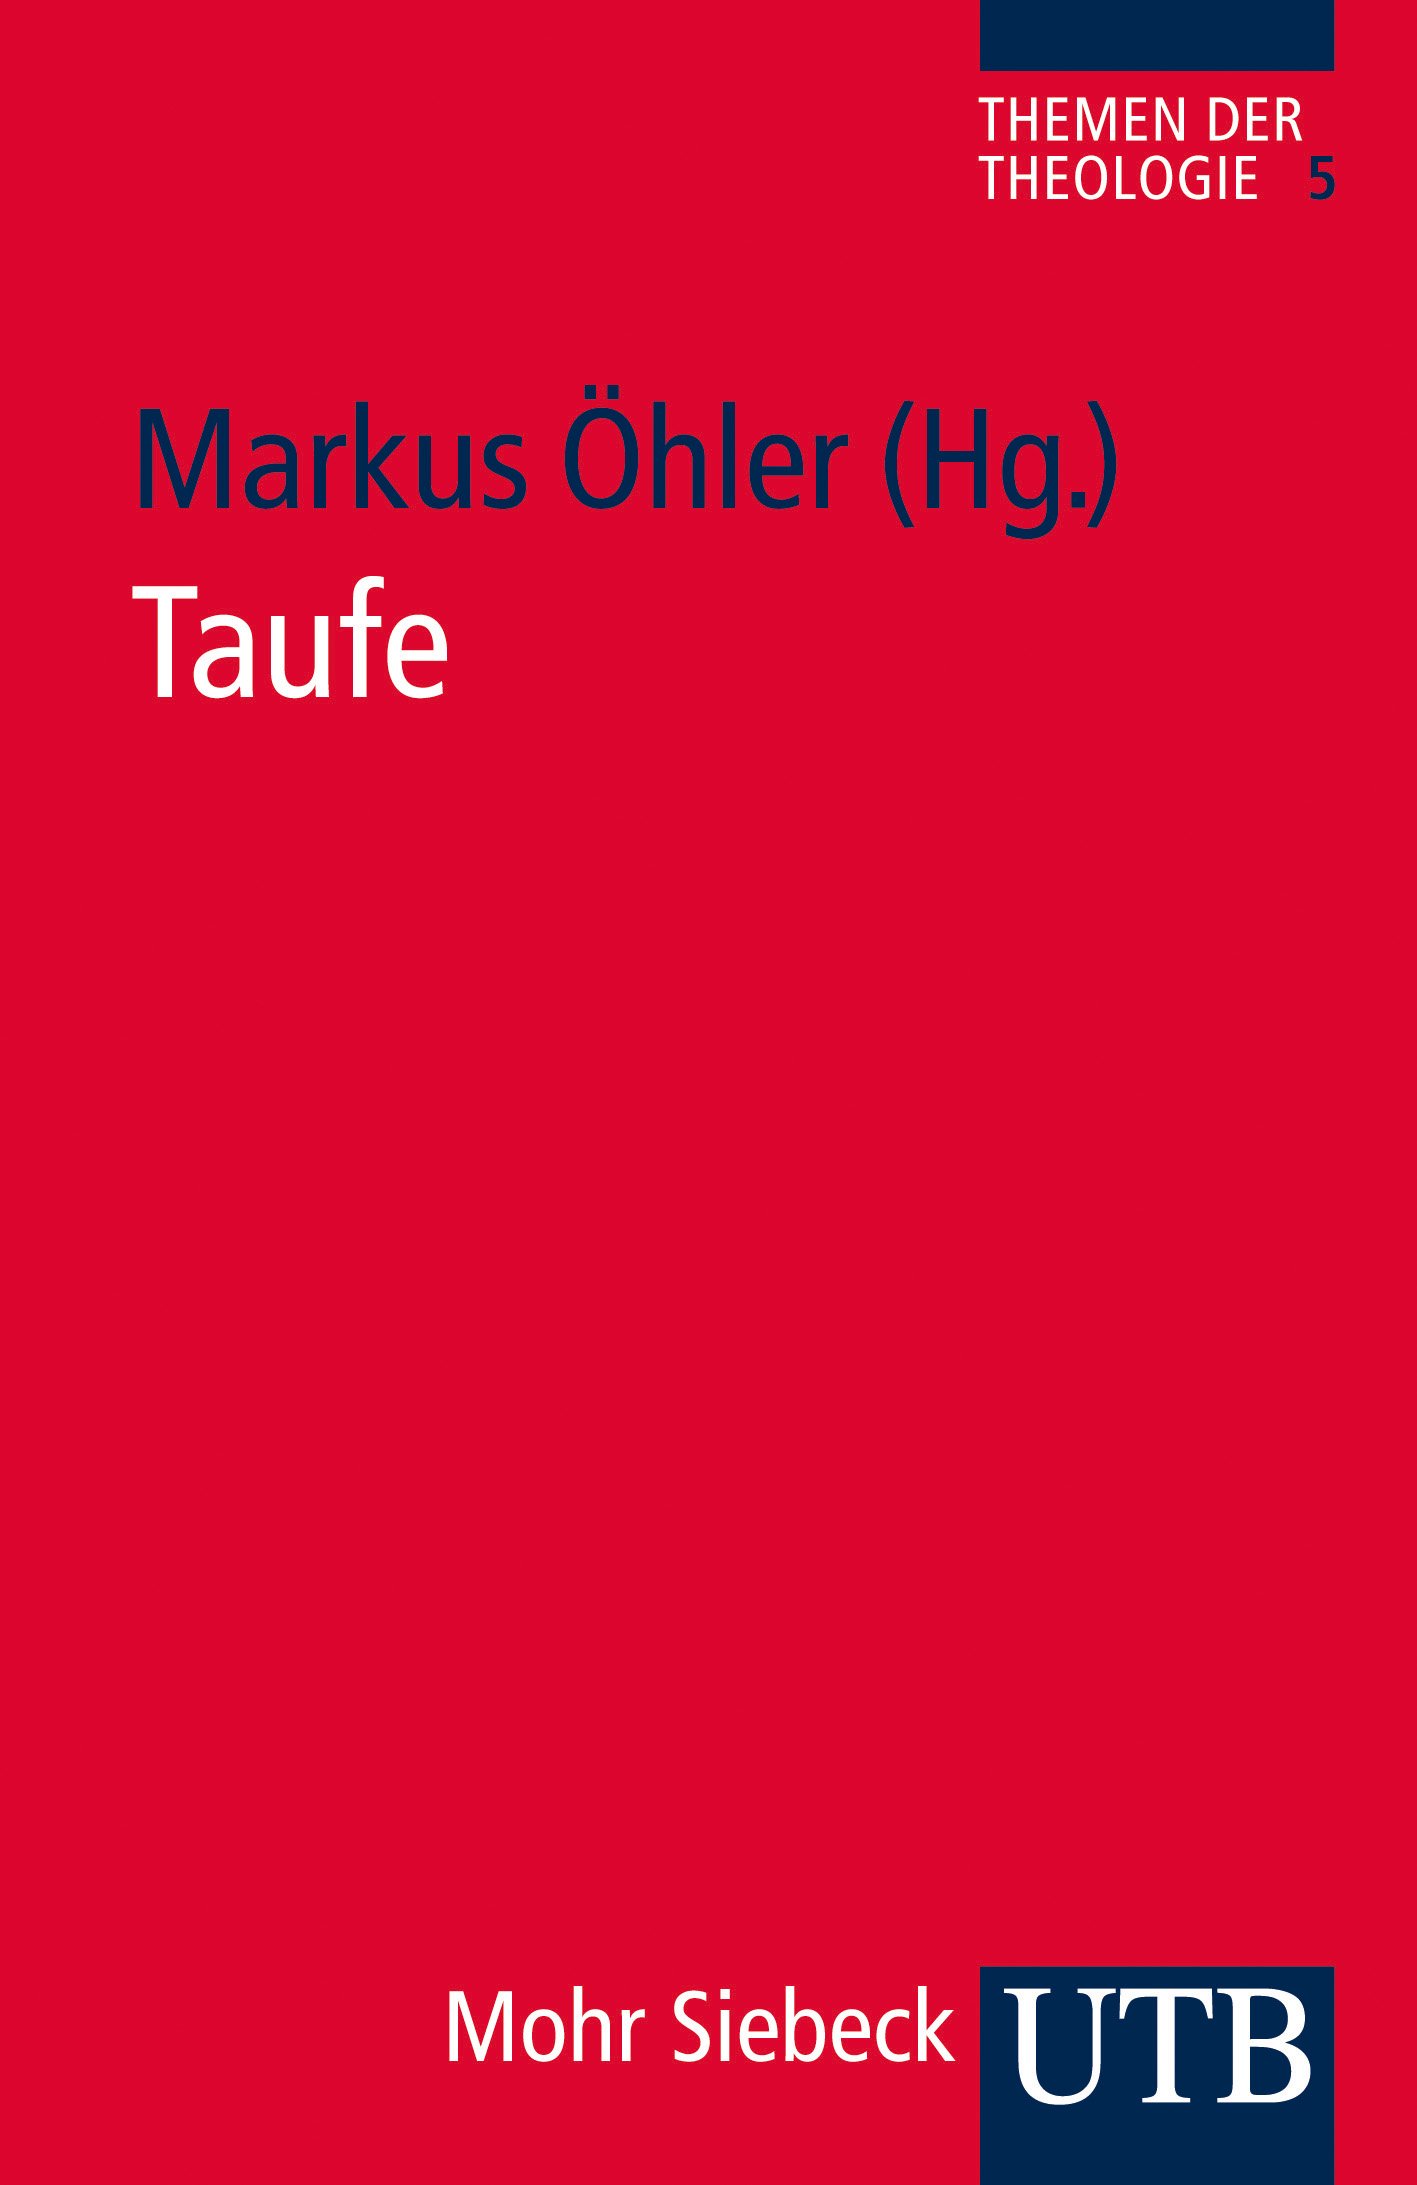 Taufe - Cover